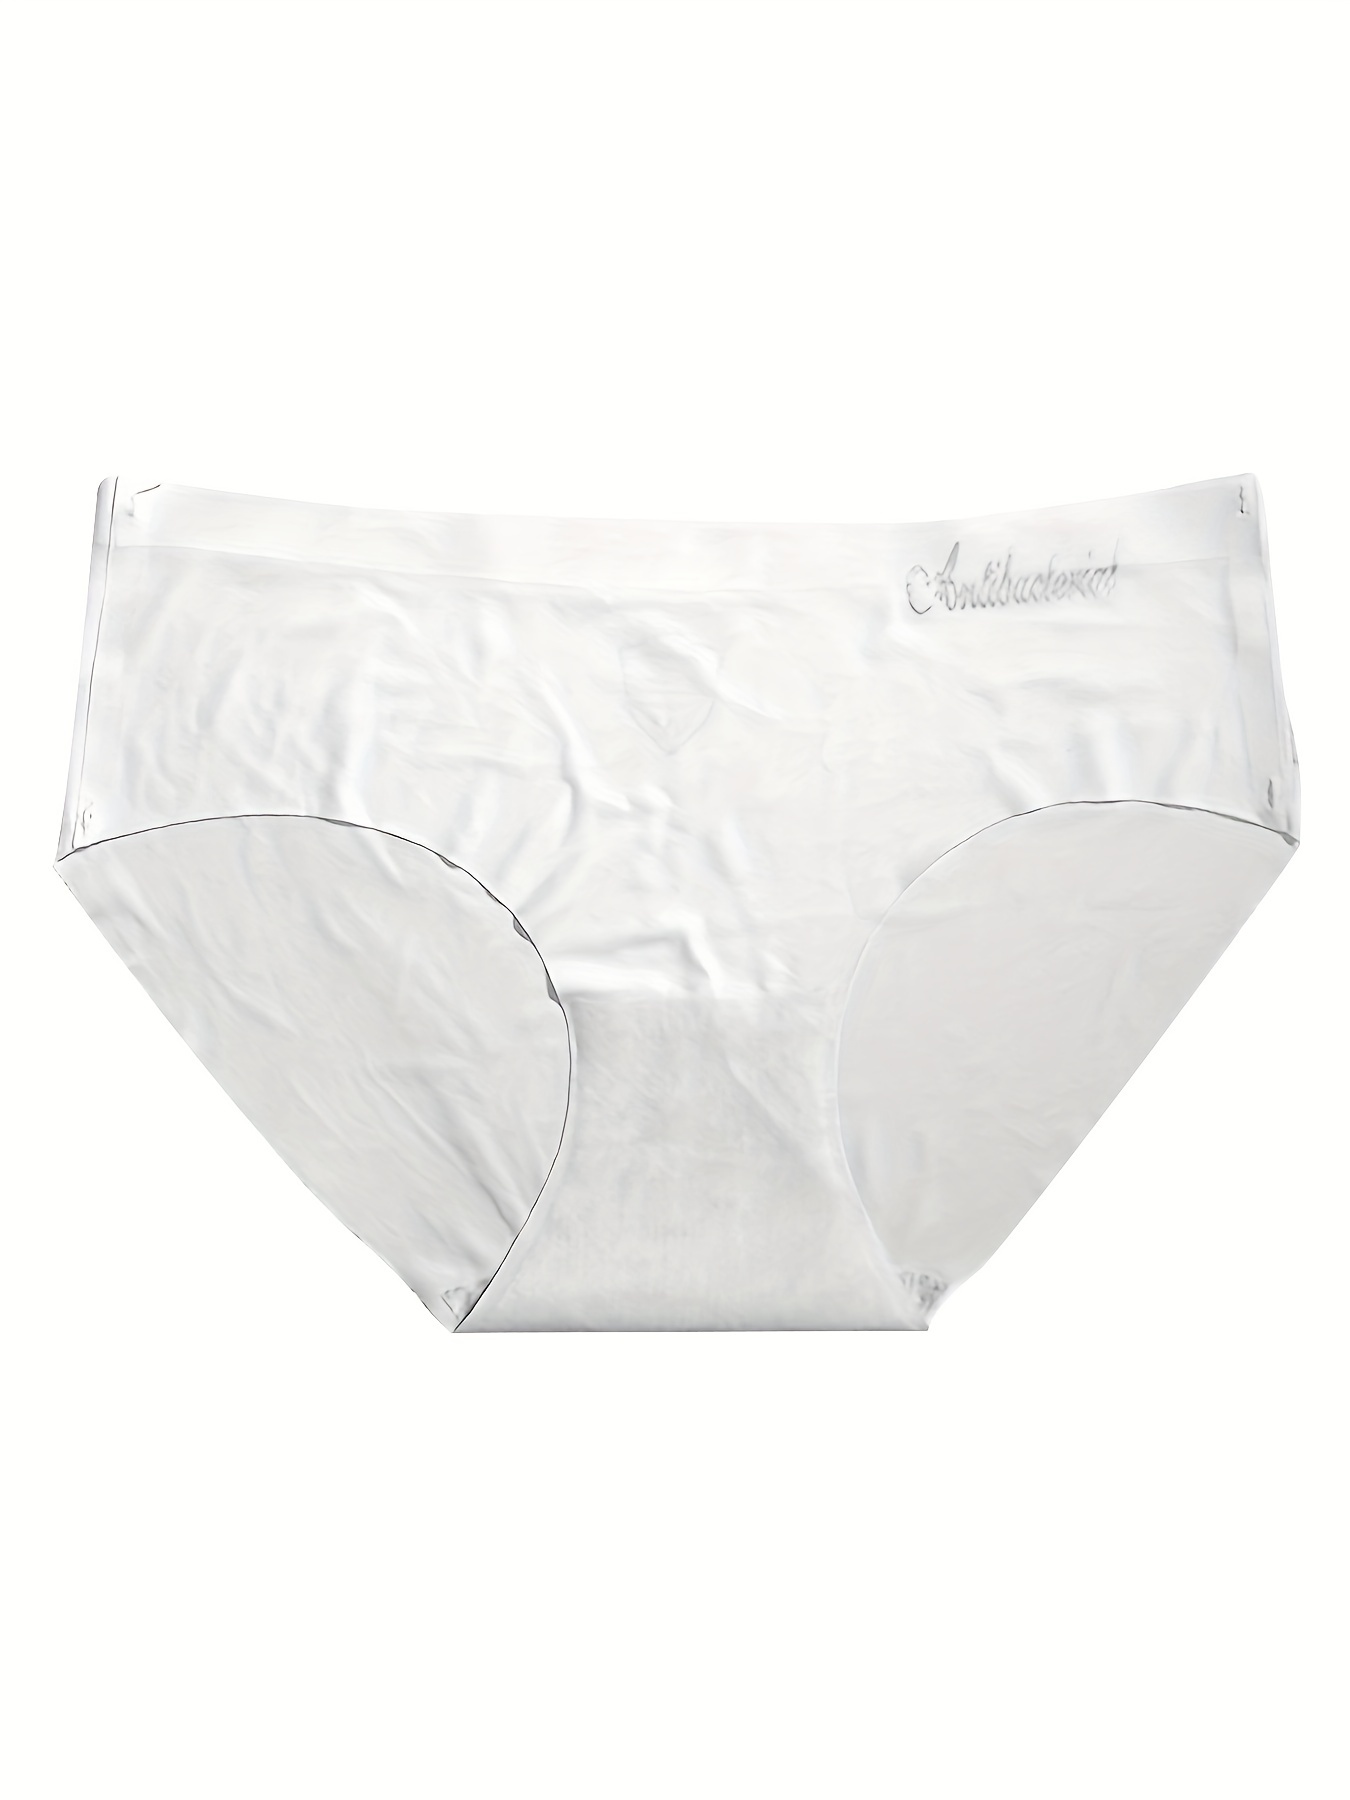 Movement Thong - Seamless, Breathable, Antimicrobial